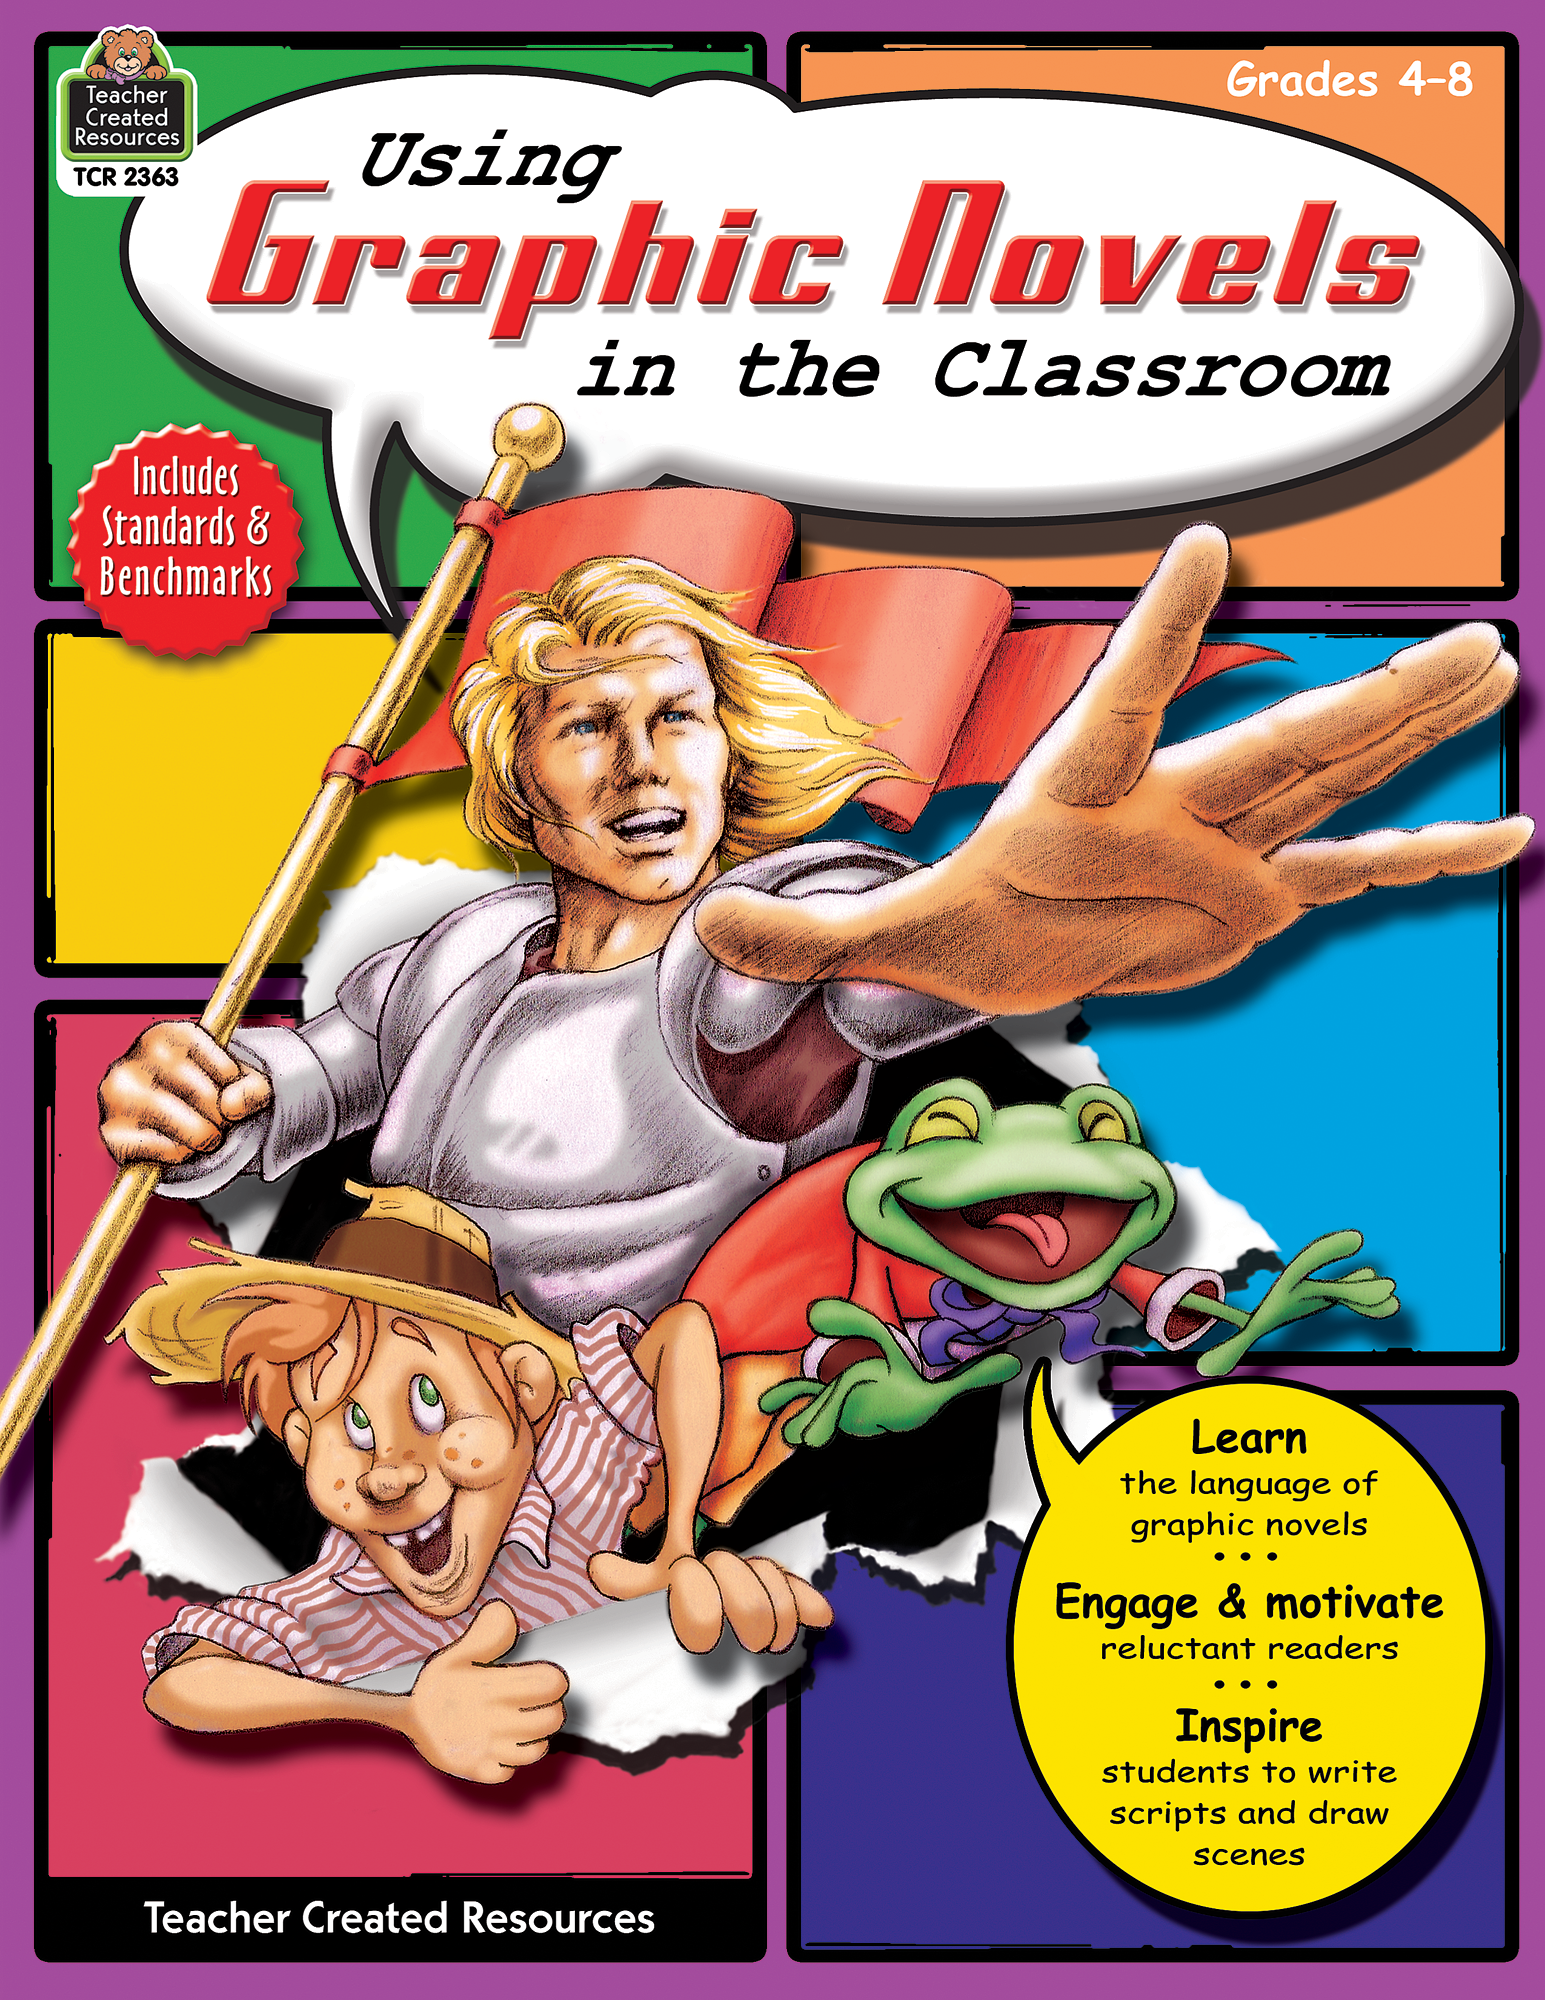 Using Graphic Novels in the Classroom Grade 4-8 - TCR2363 | Teacher